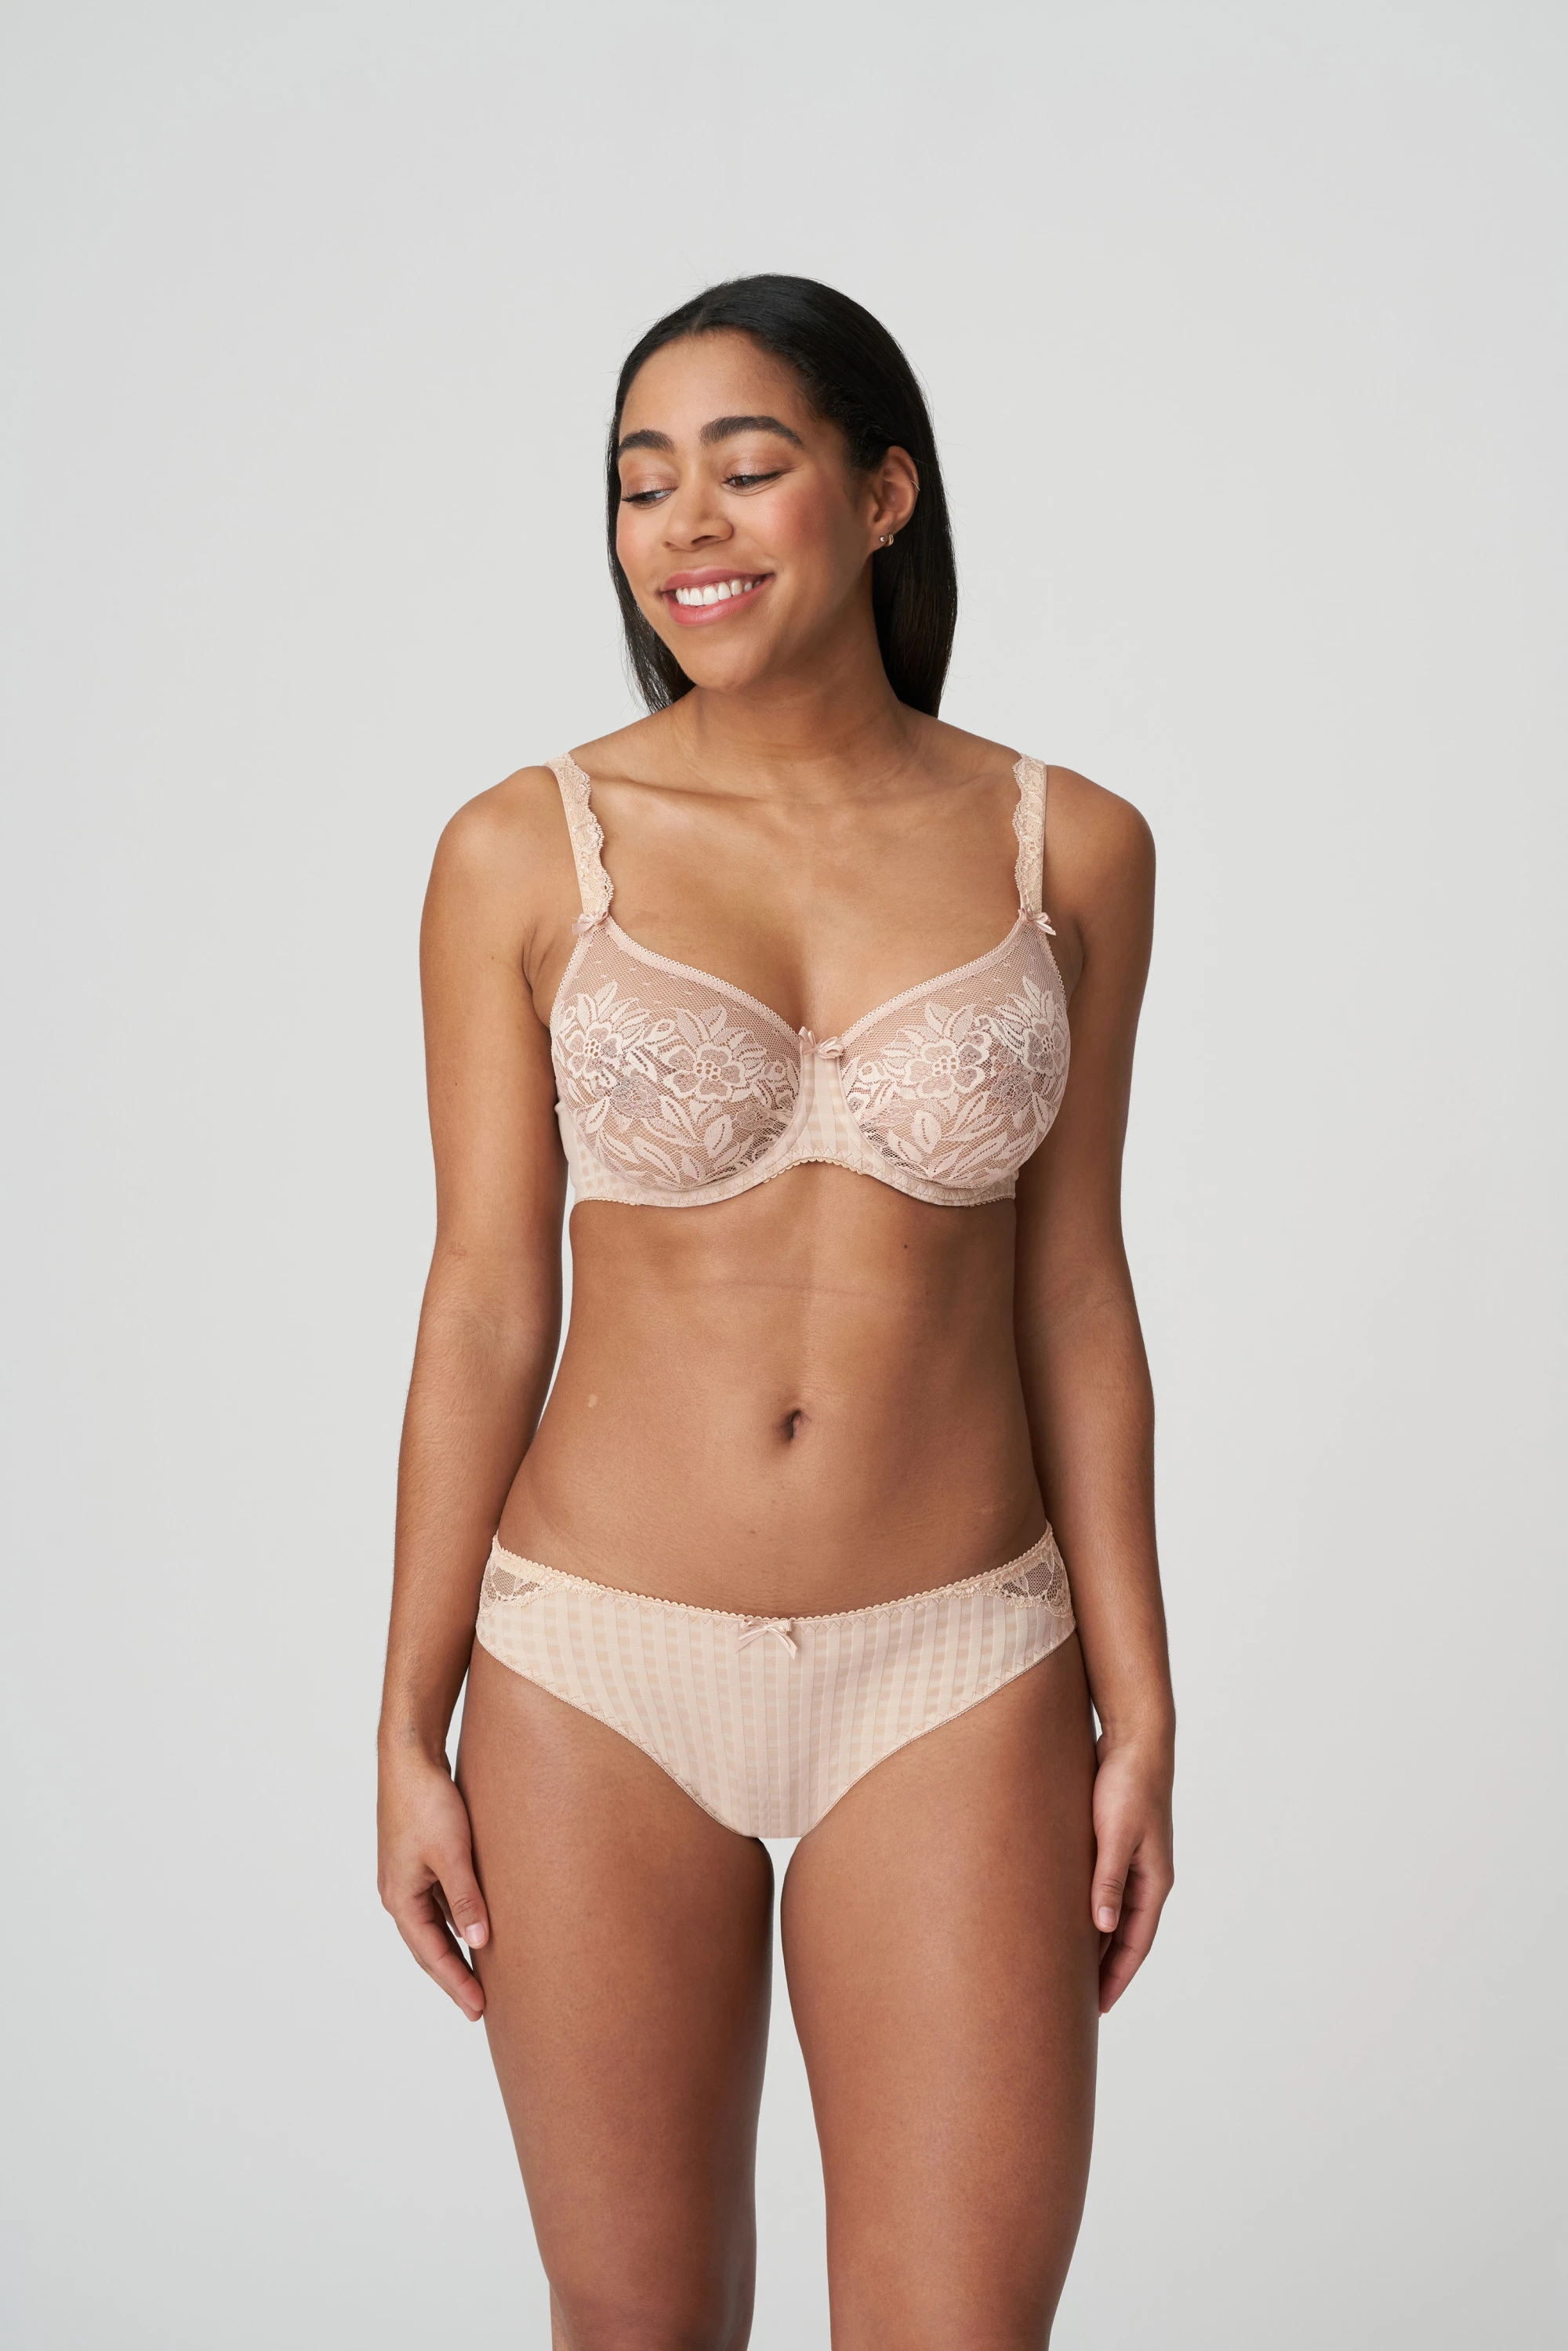 PrimaDonna Madison 0262127-CAL Women's Caffe Latte Underwired Full